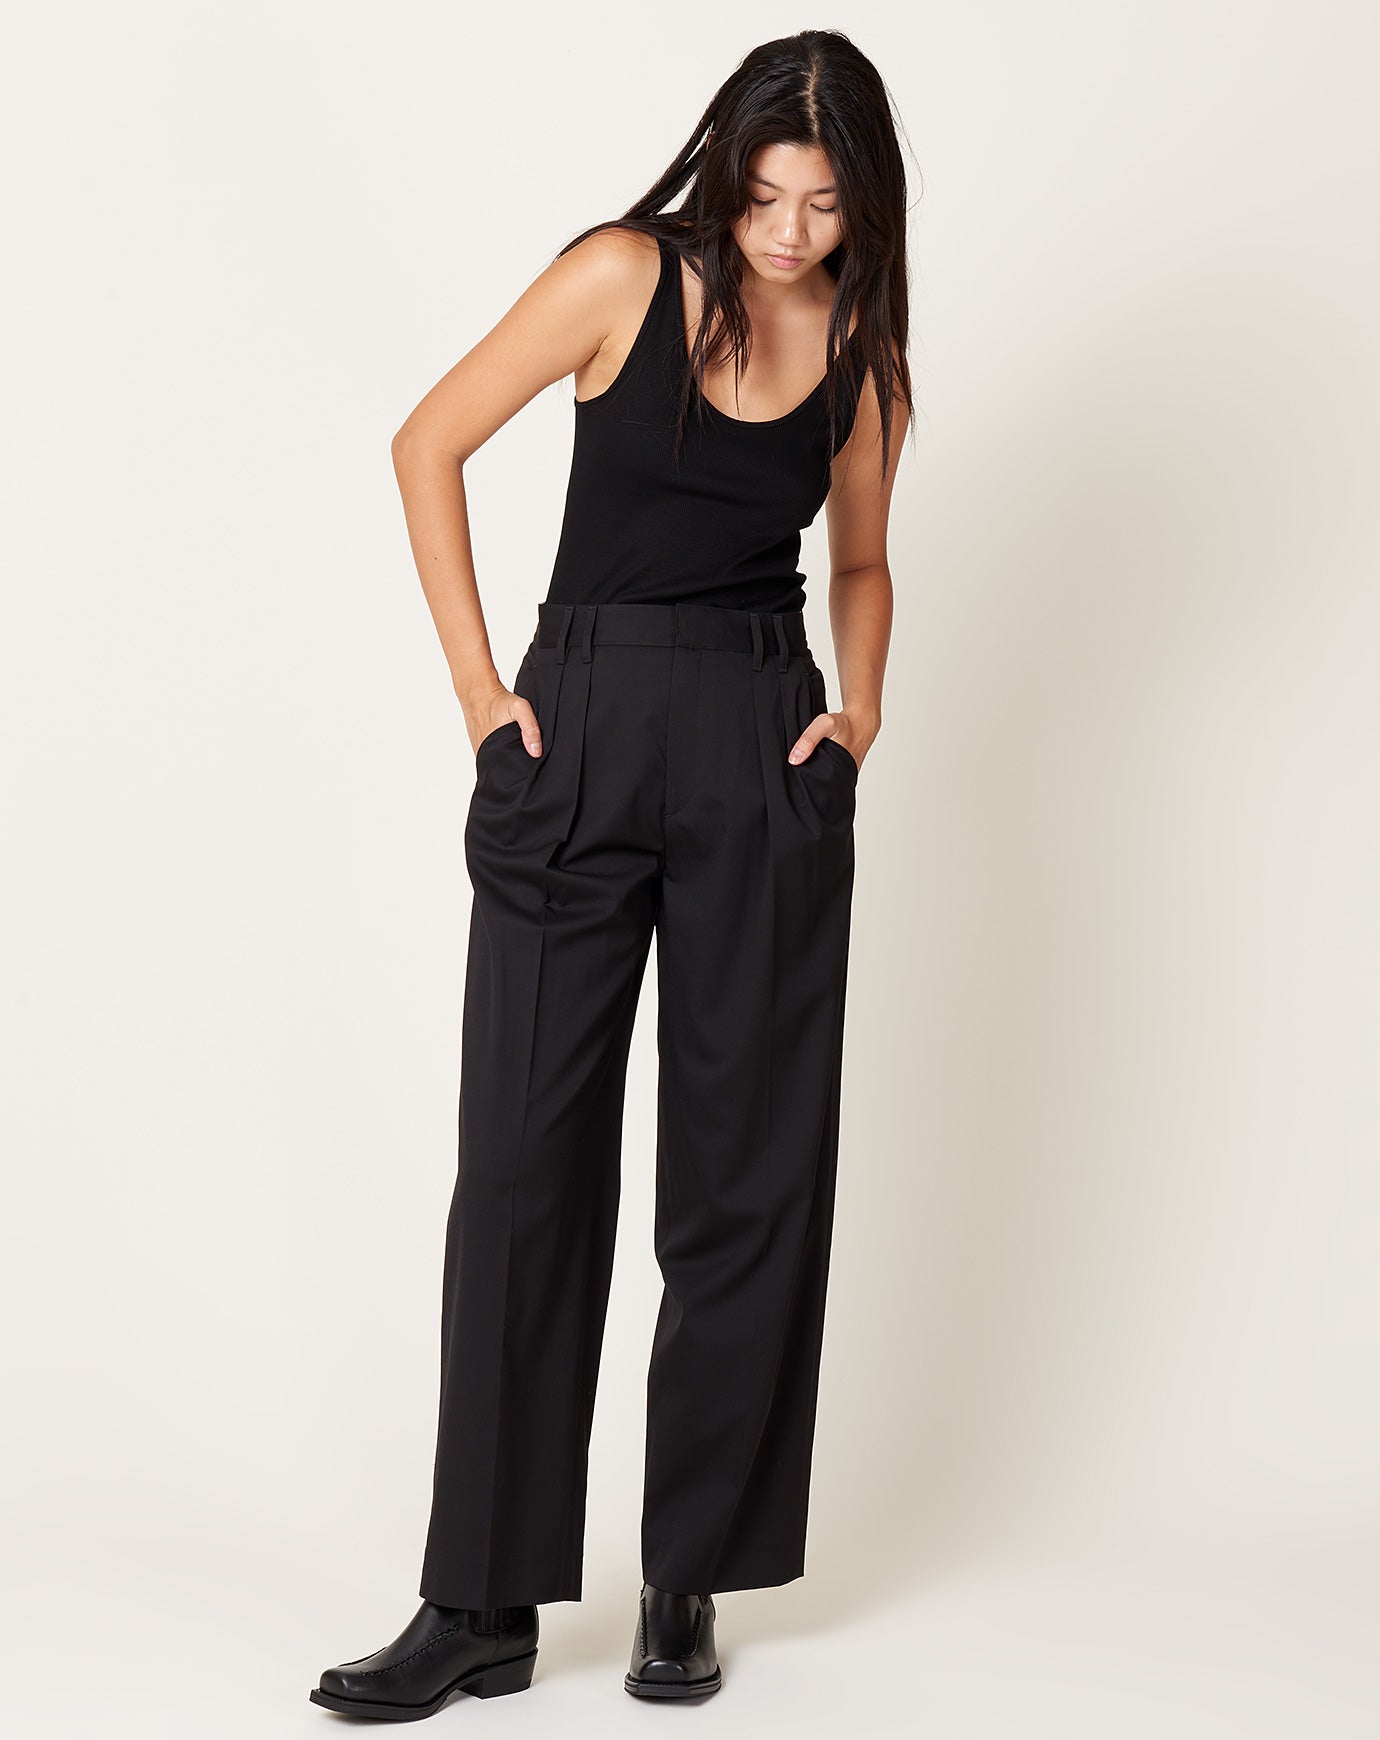 Shop Nicole Pleat Front Pant in Brown | Max Women's Fashion NZ